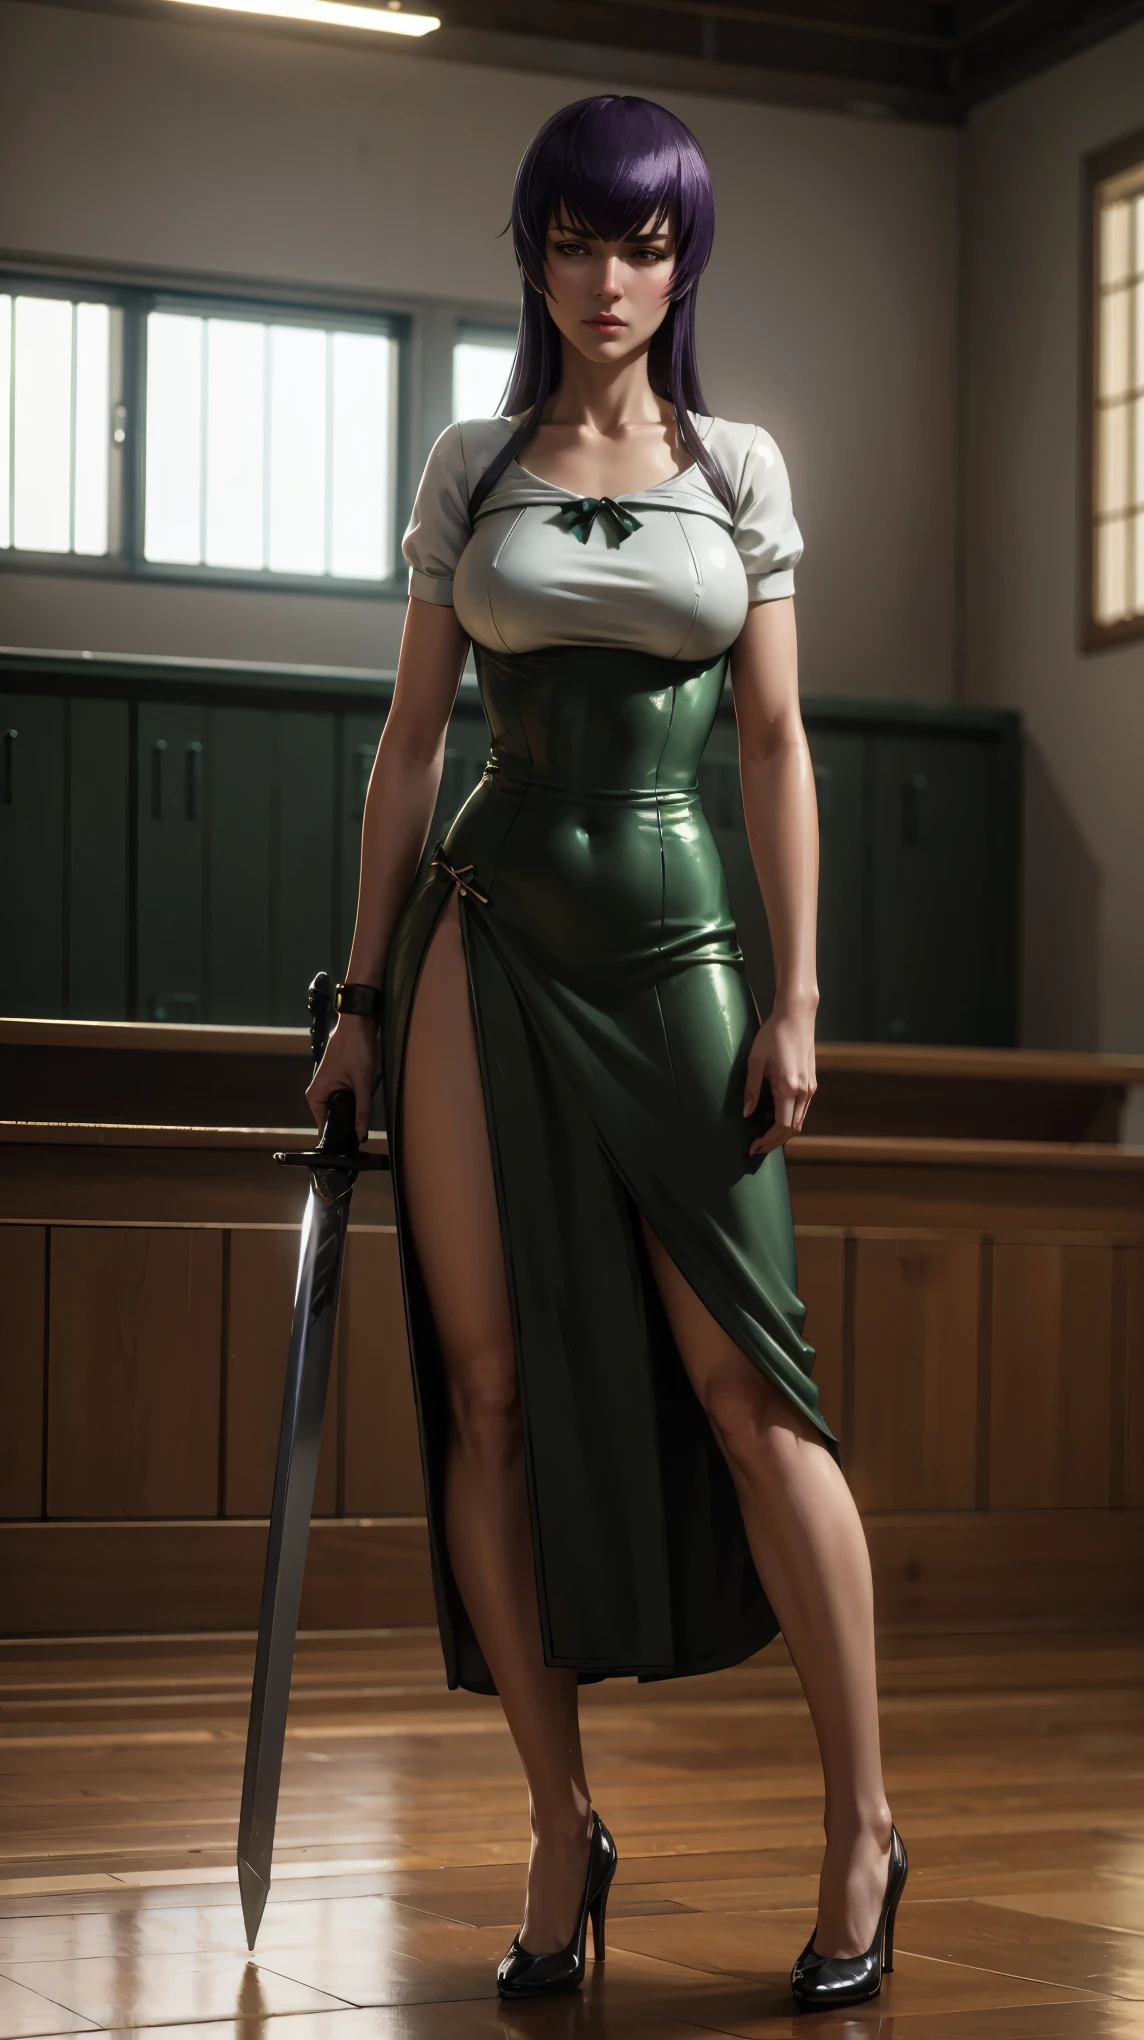 Very detailed, high quality, masterpiece, beautiful, saeko, long legs, 1 hand with wooden sword, 1 hand between the legs, long dress, avierto dress, long purple hair, high school dress, medra sword, sword in hand, full body, wide shot, gym, lockers, alone, closed room, style, (erotic atmosphere), very detailed, high quality, masterpiece, beautiful, 1 girl, standing, seen from below, prosthesis, sexy saeko, skirt, skirt moving, sword pointing, brown and green dress, full body, (best quality)), ((masterpiece: 1.2) ), (extremely detailed: 1.1), (8k, high quality, cinematic, hyper-realistic, illustration), (autodesk maya, octane rendering, unreal engine, game character, ray tracing, hdr), (16mm focal length, f/4 aperture, dynamic perspective, depth of field), (1 girl, dynamic angle , casting pose. saeko, big breasts and small hips, hidden masturbation, looking at the viewer, red cheeks, high heels, long open skirt, visible breasts and vagina, gym, benches and lockers around her), 3d, realistic, CG , 3D model, beautiful, elegant, safe (hdri, bloom, edge lighting, soft lighting, discreet.  ), zhongfenghua, delicate\(sex\)